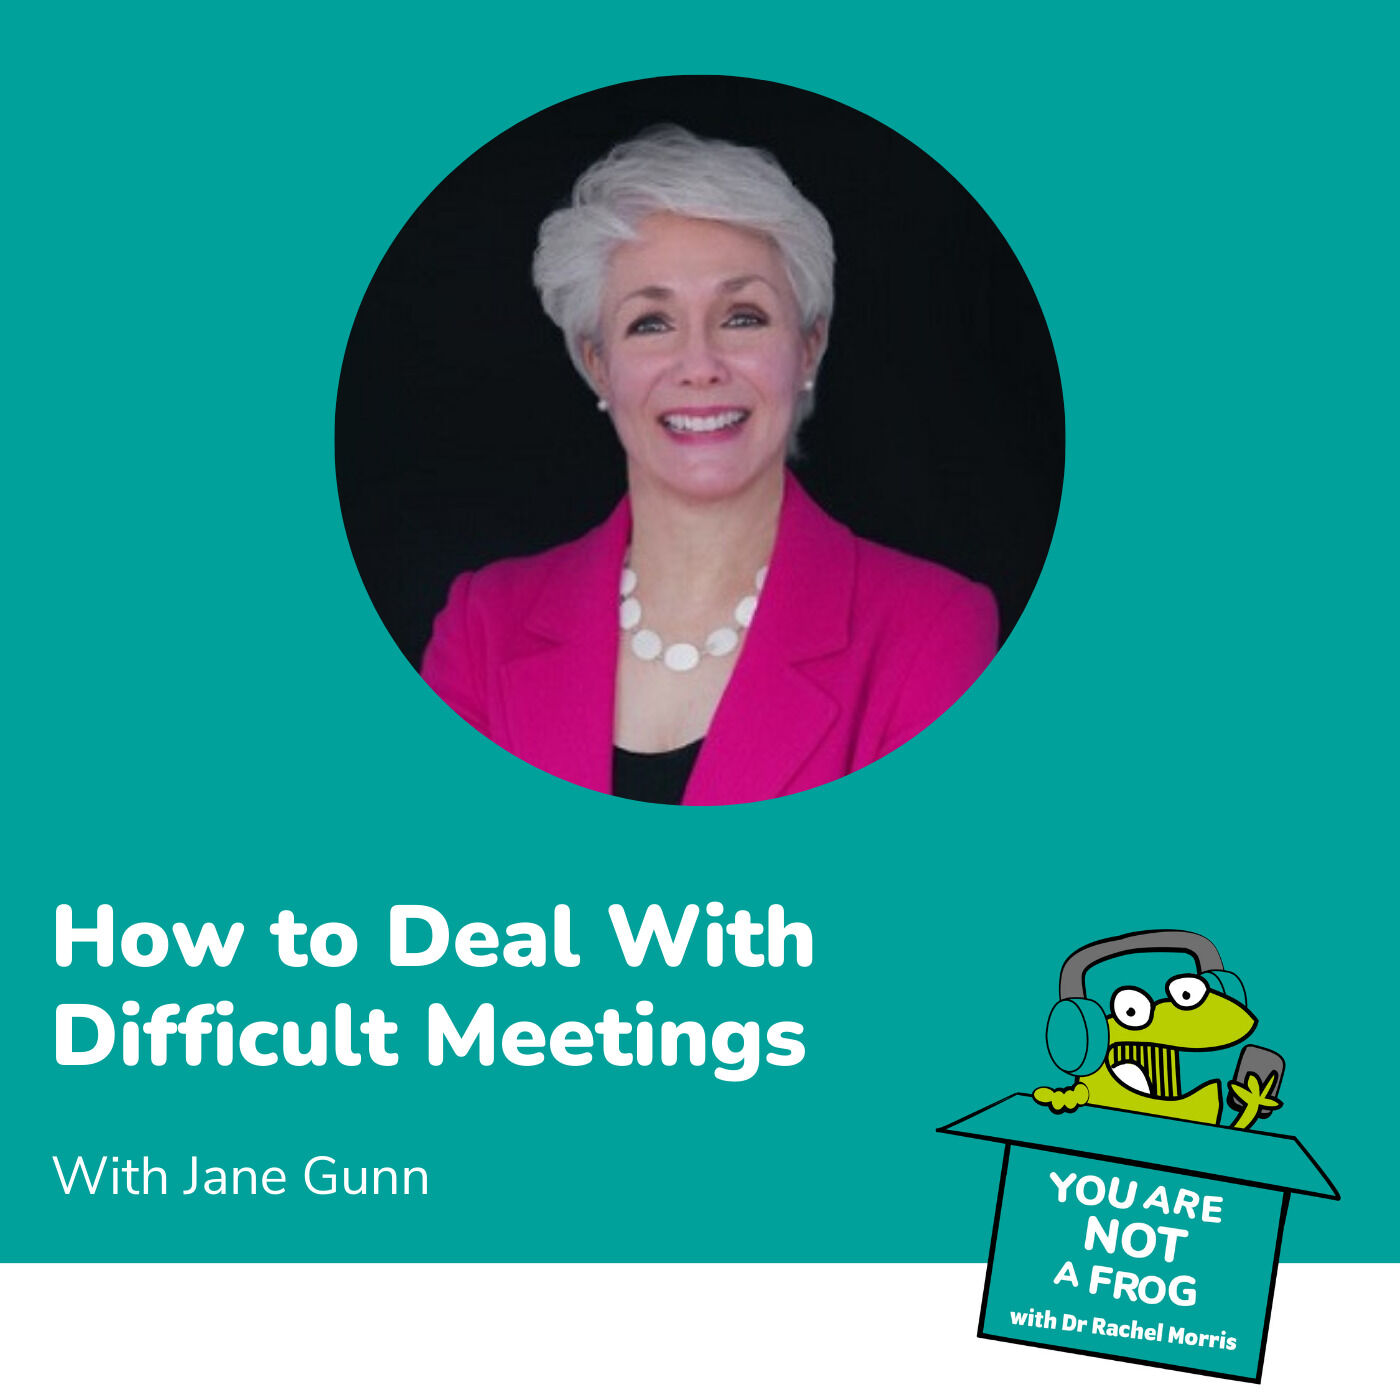 How to Deal With Difficult Meetings with Jane Gunn